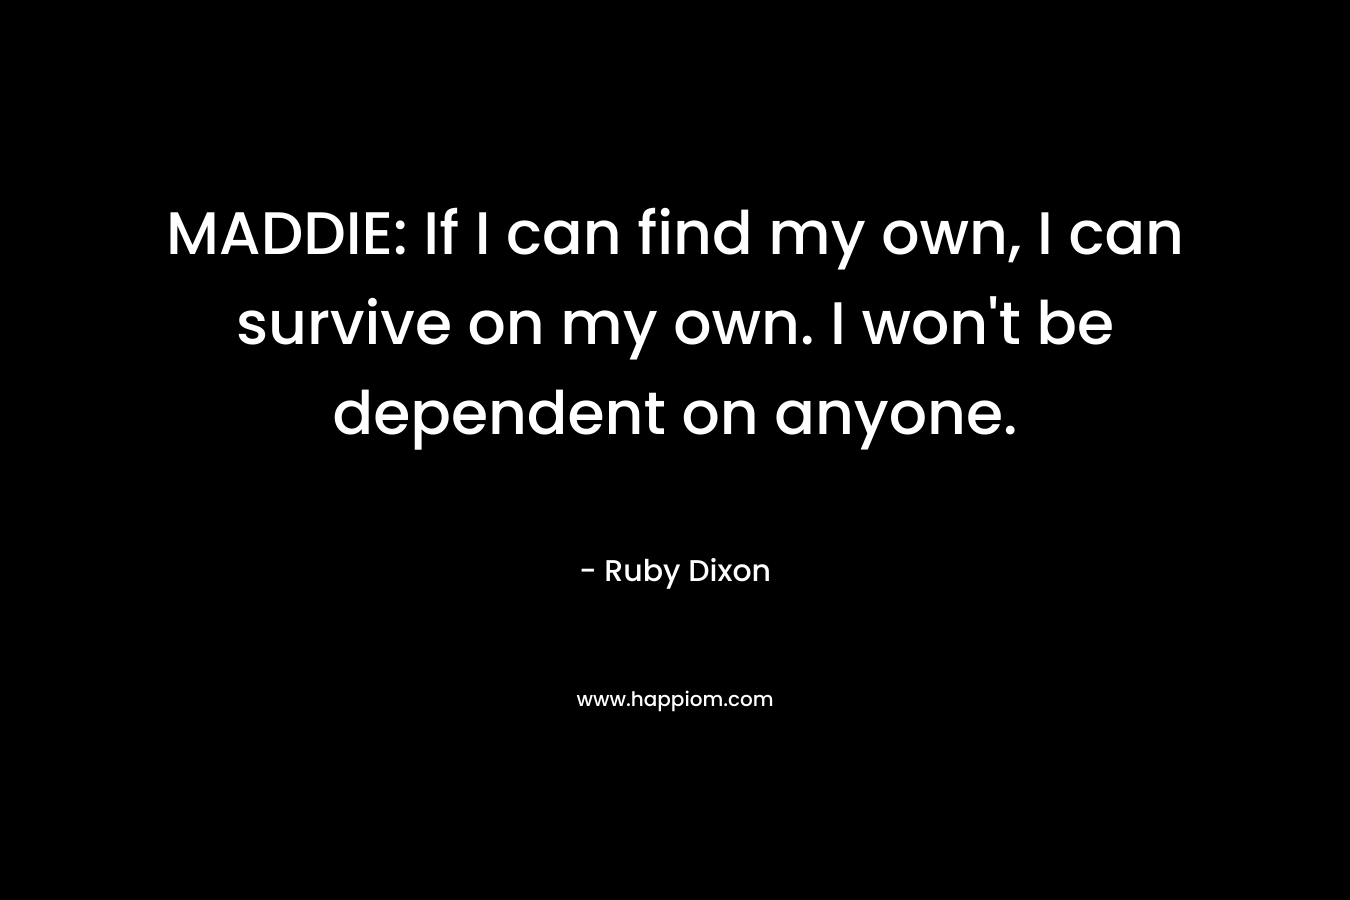 MADDIE: If I can find my own, I can survive on my own. I won't be dependent on anyone.